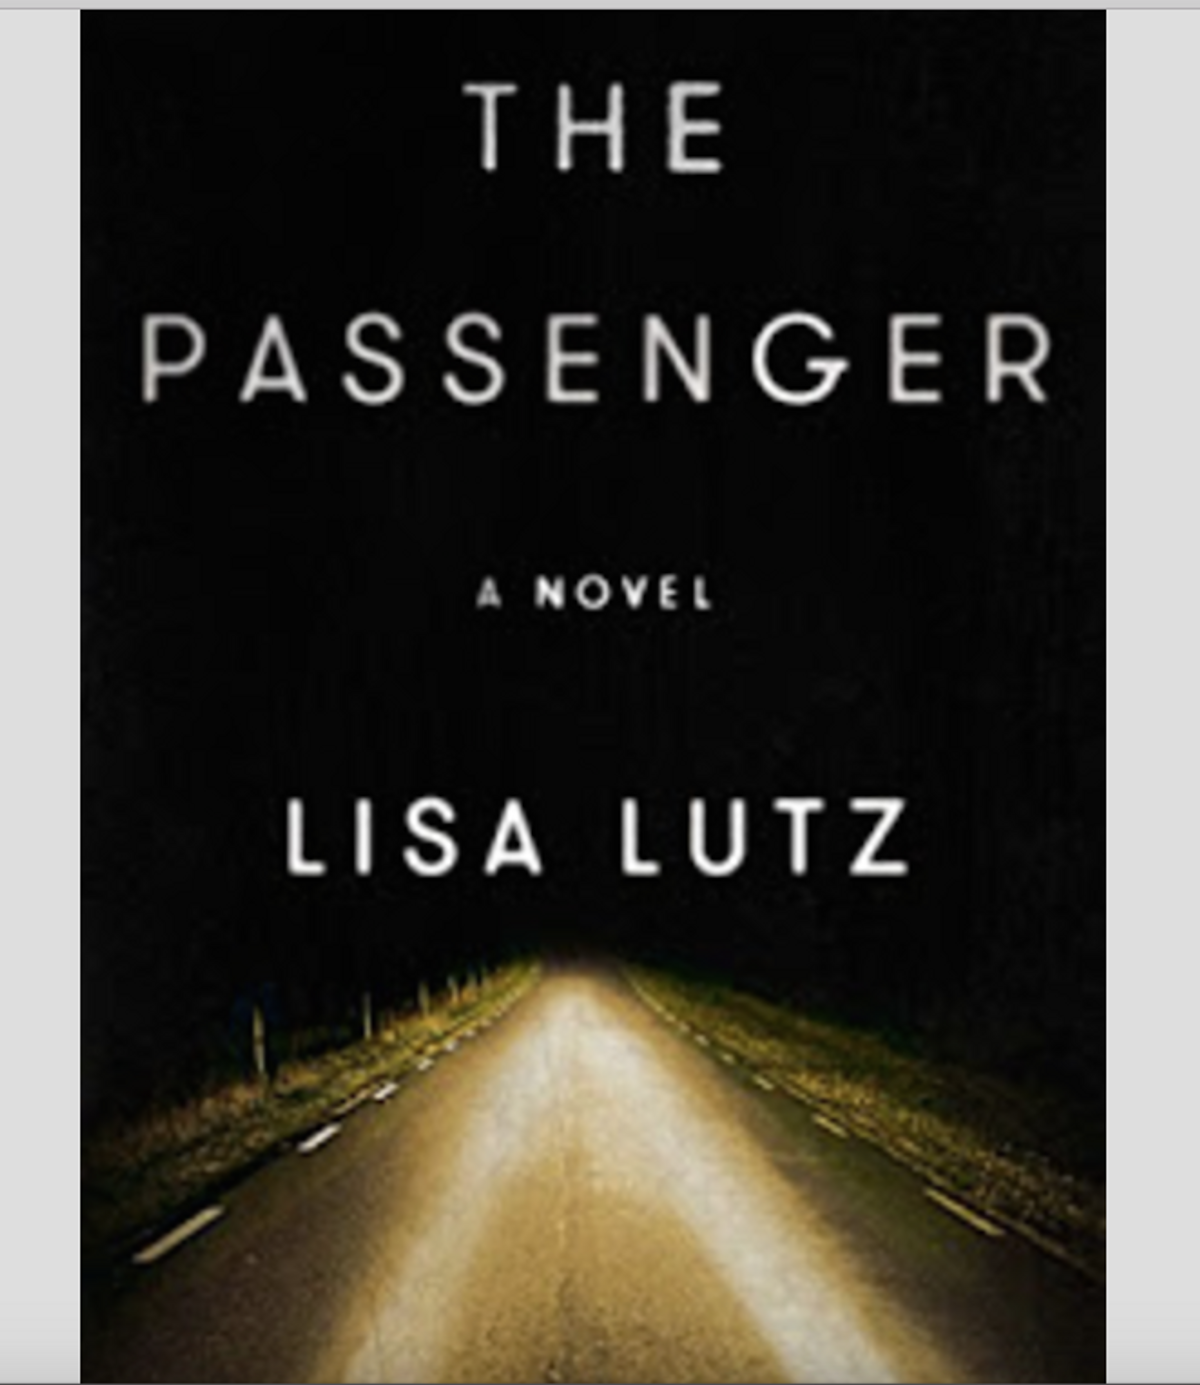 A Review Of "The Passenger"